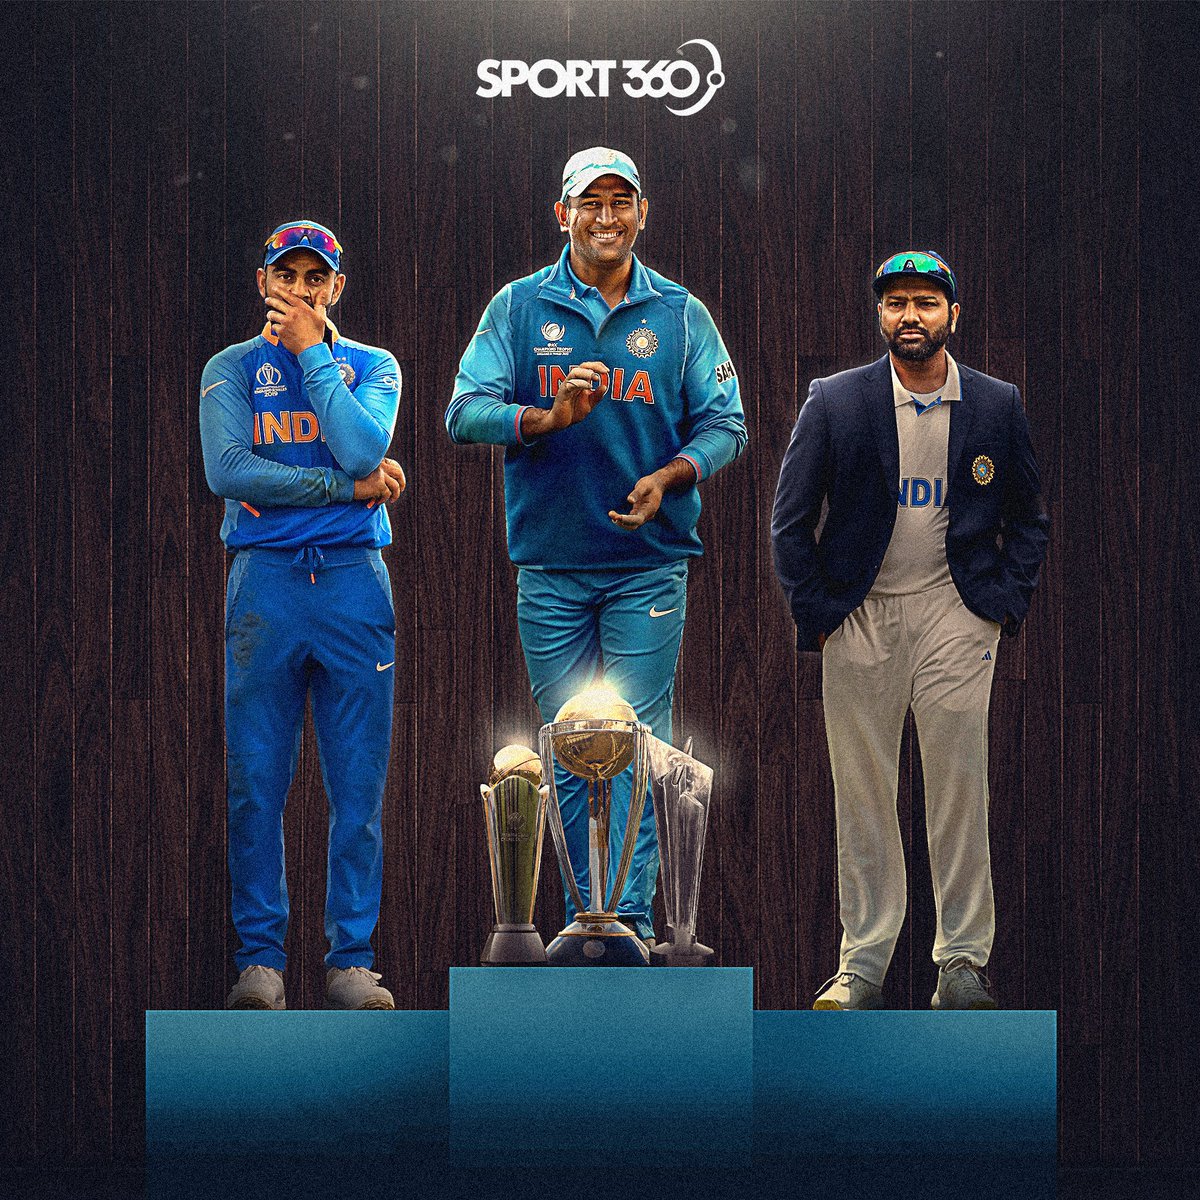 The ICC trophies have dried up for India post the MS Dhoni era 🏆❌